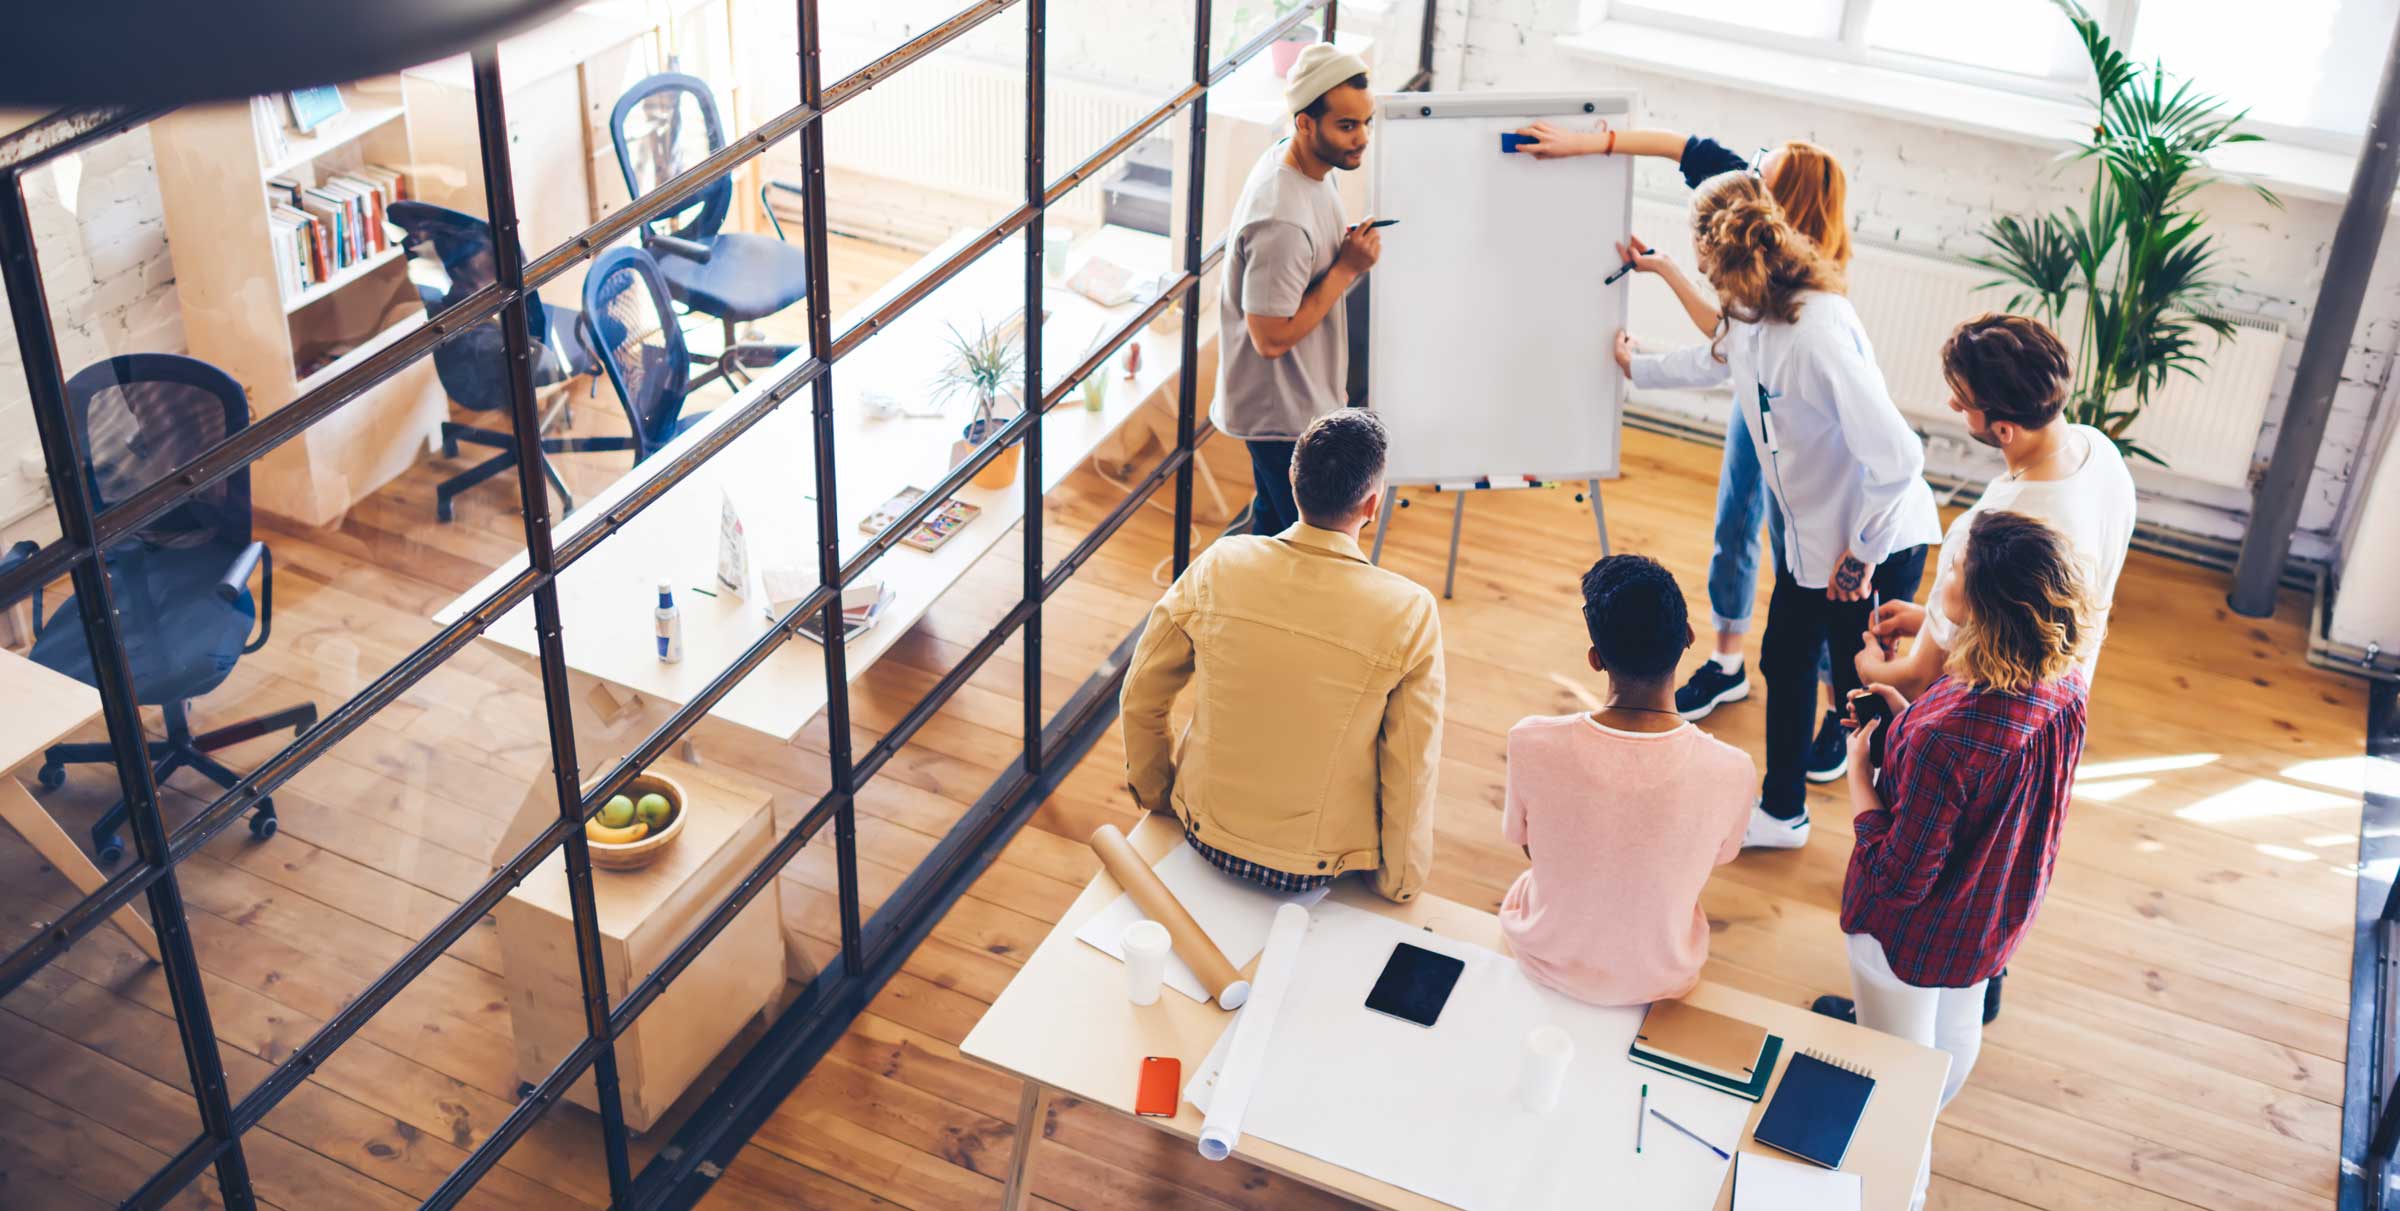 A group of employees in an open office floor plan discussing how the rapidly evolving business environment requires the management of expectations and a focus on adaptability.